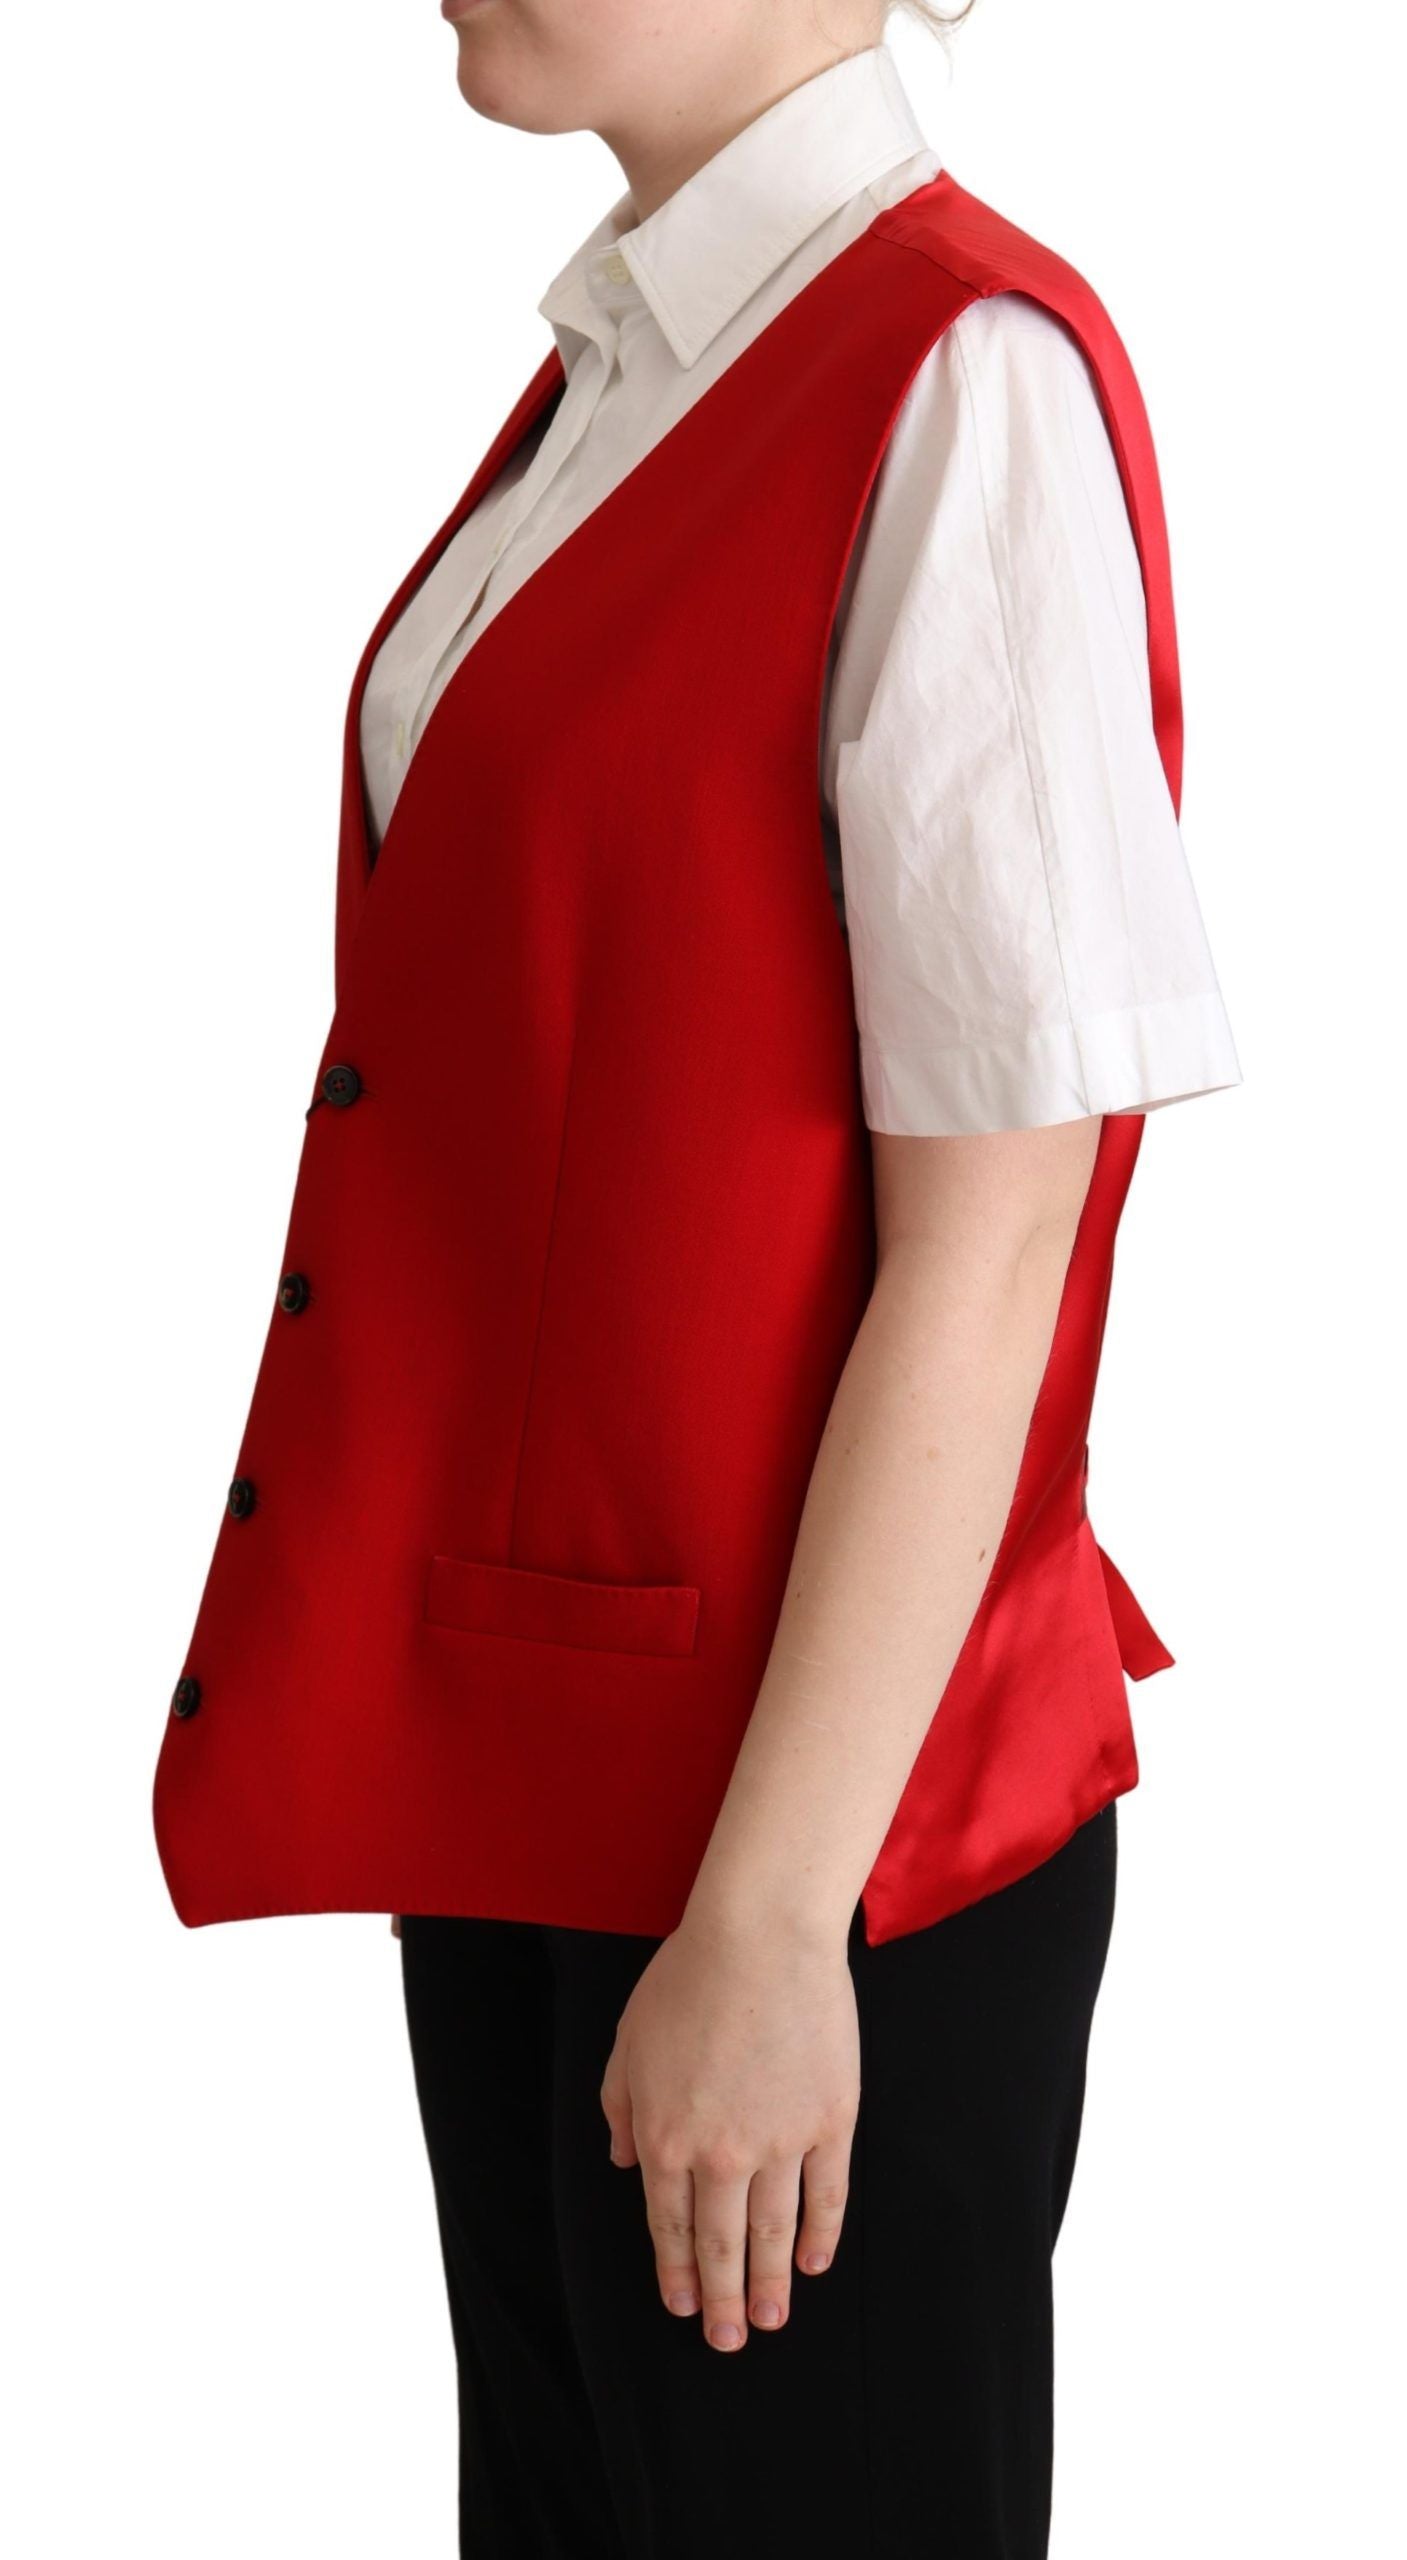 Dolce & Gabbana Red Virgin Wool Sleeveless Waistcoat Vest - Designed by Dolce & Gabbana Available to Buy at a Discounted Price on Moon Behind The Hill Online Designer Discount Store